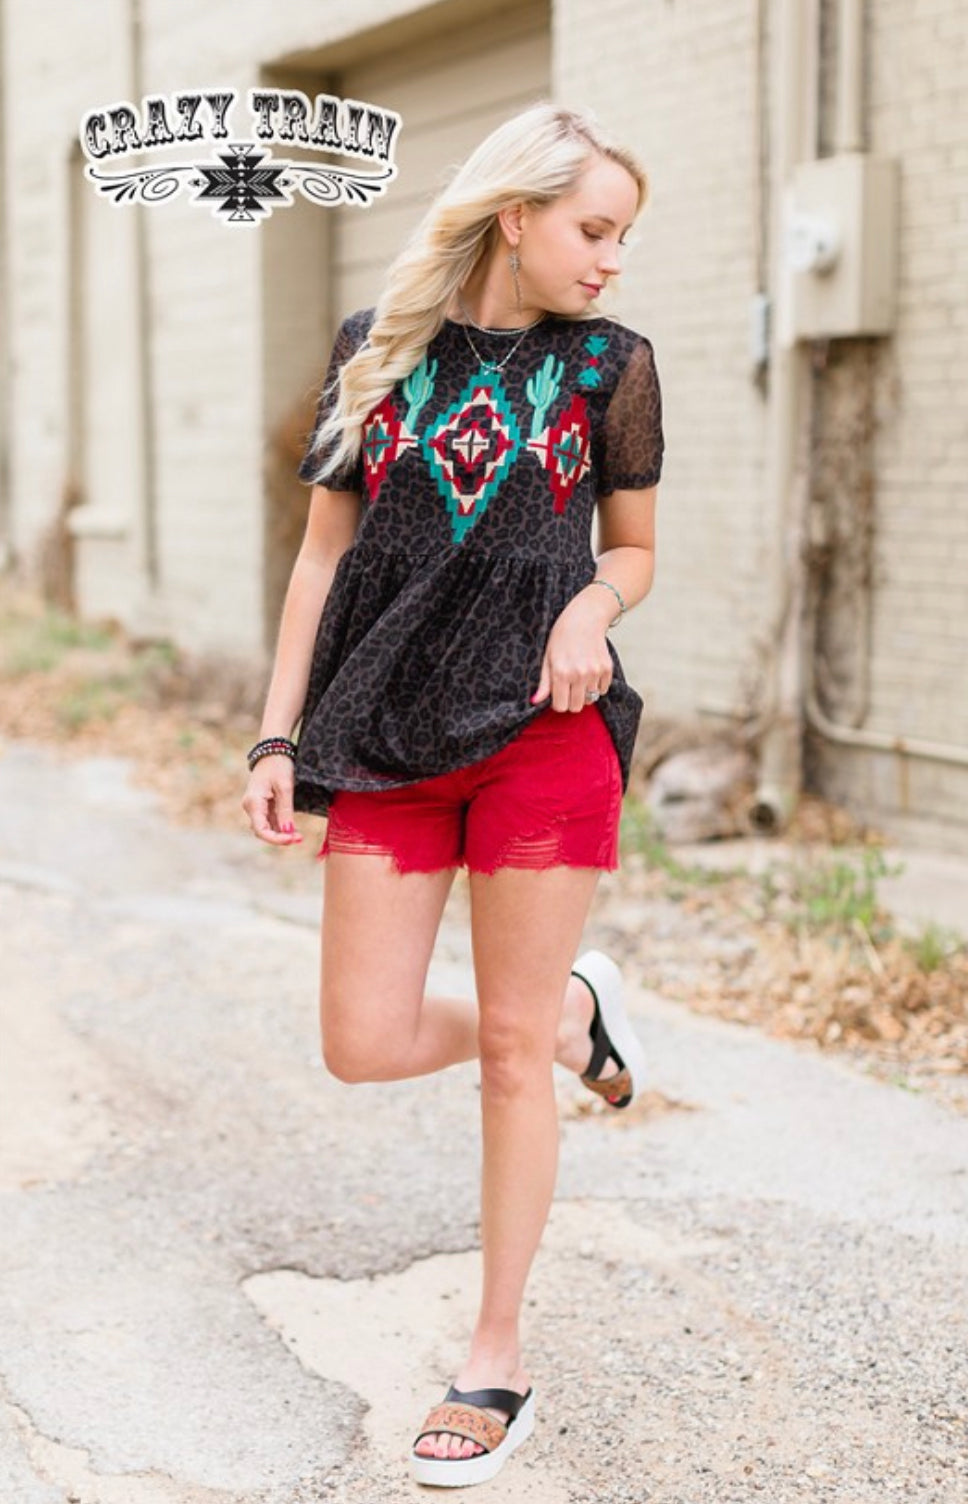 Lil Red Rodeo Shorts by Crazy Train